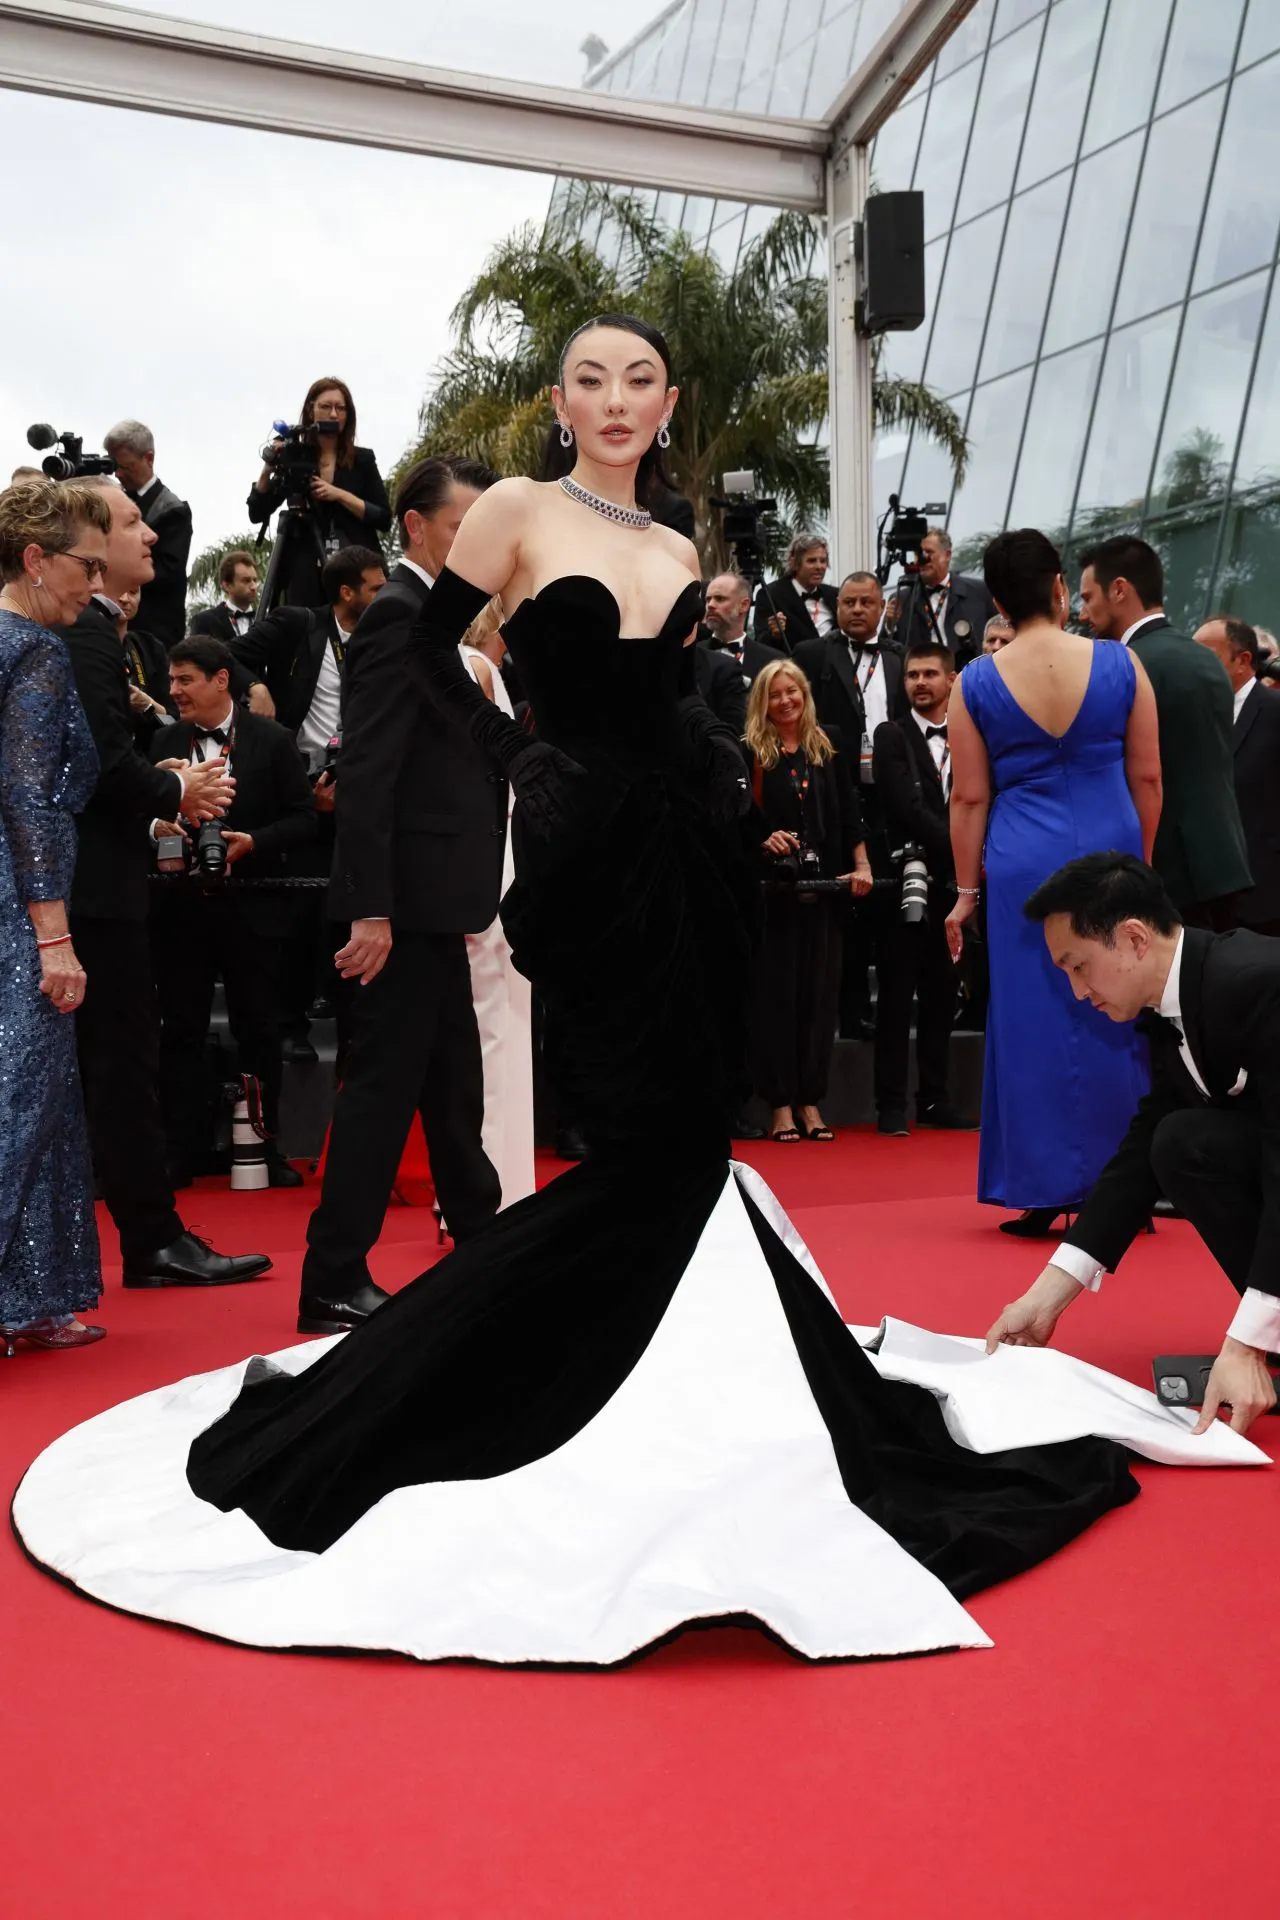 JESSICA WANG AT THE APPRENTICE PREMIERE AT CANNES FILM FESTIVAL6